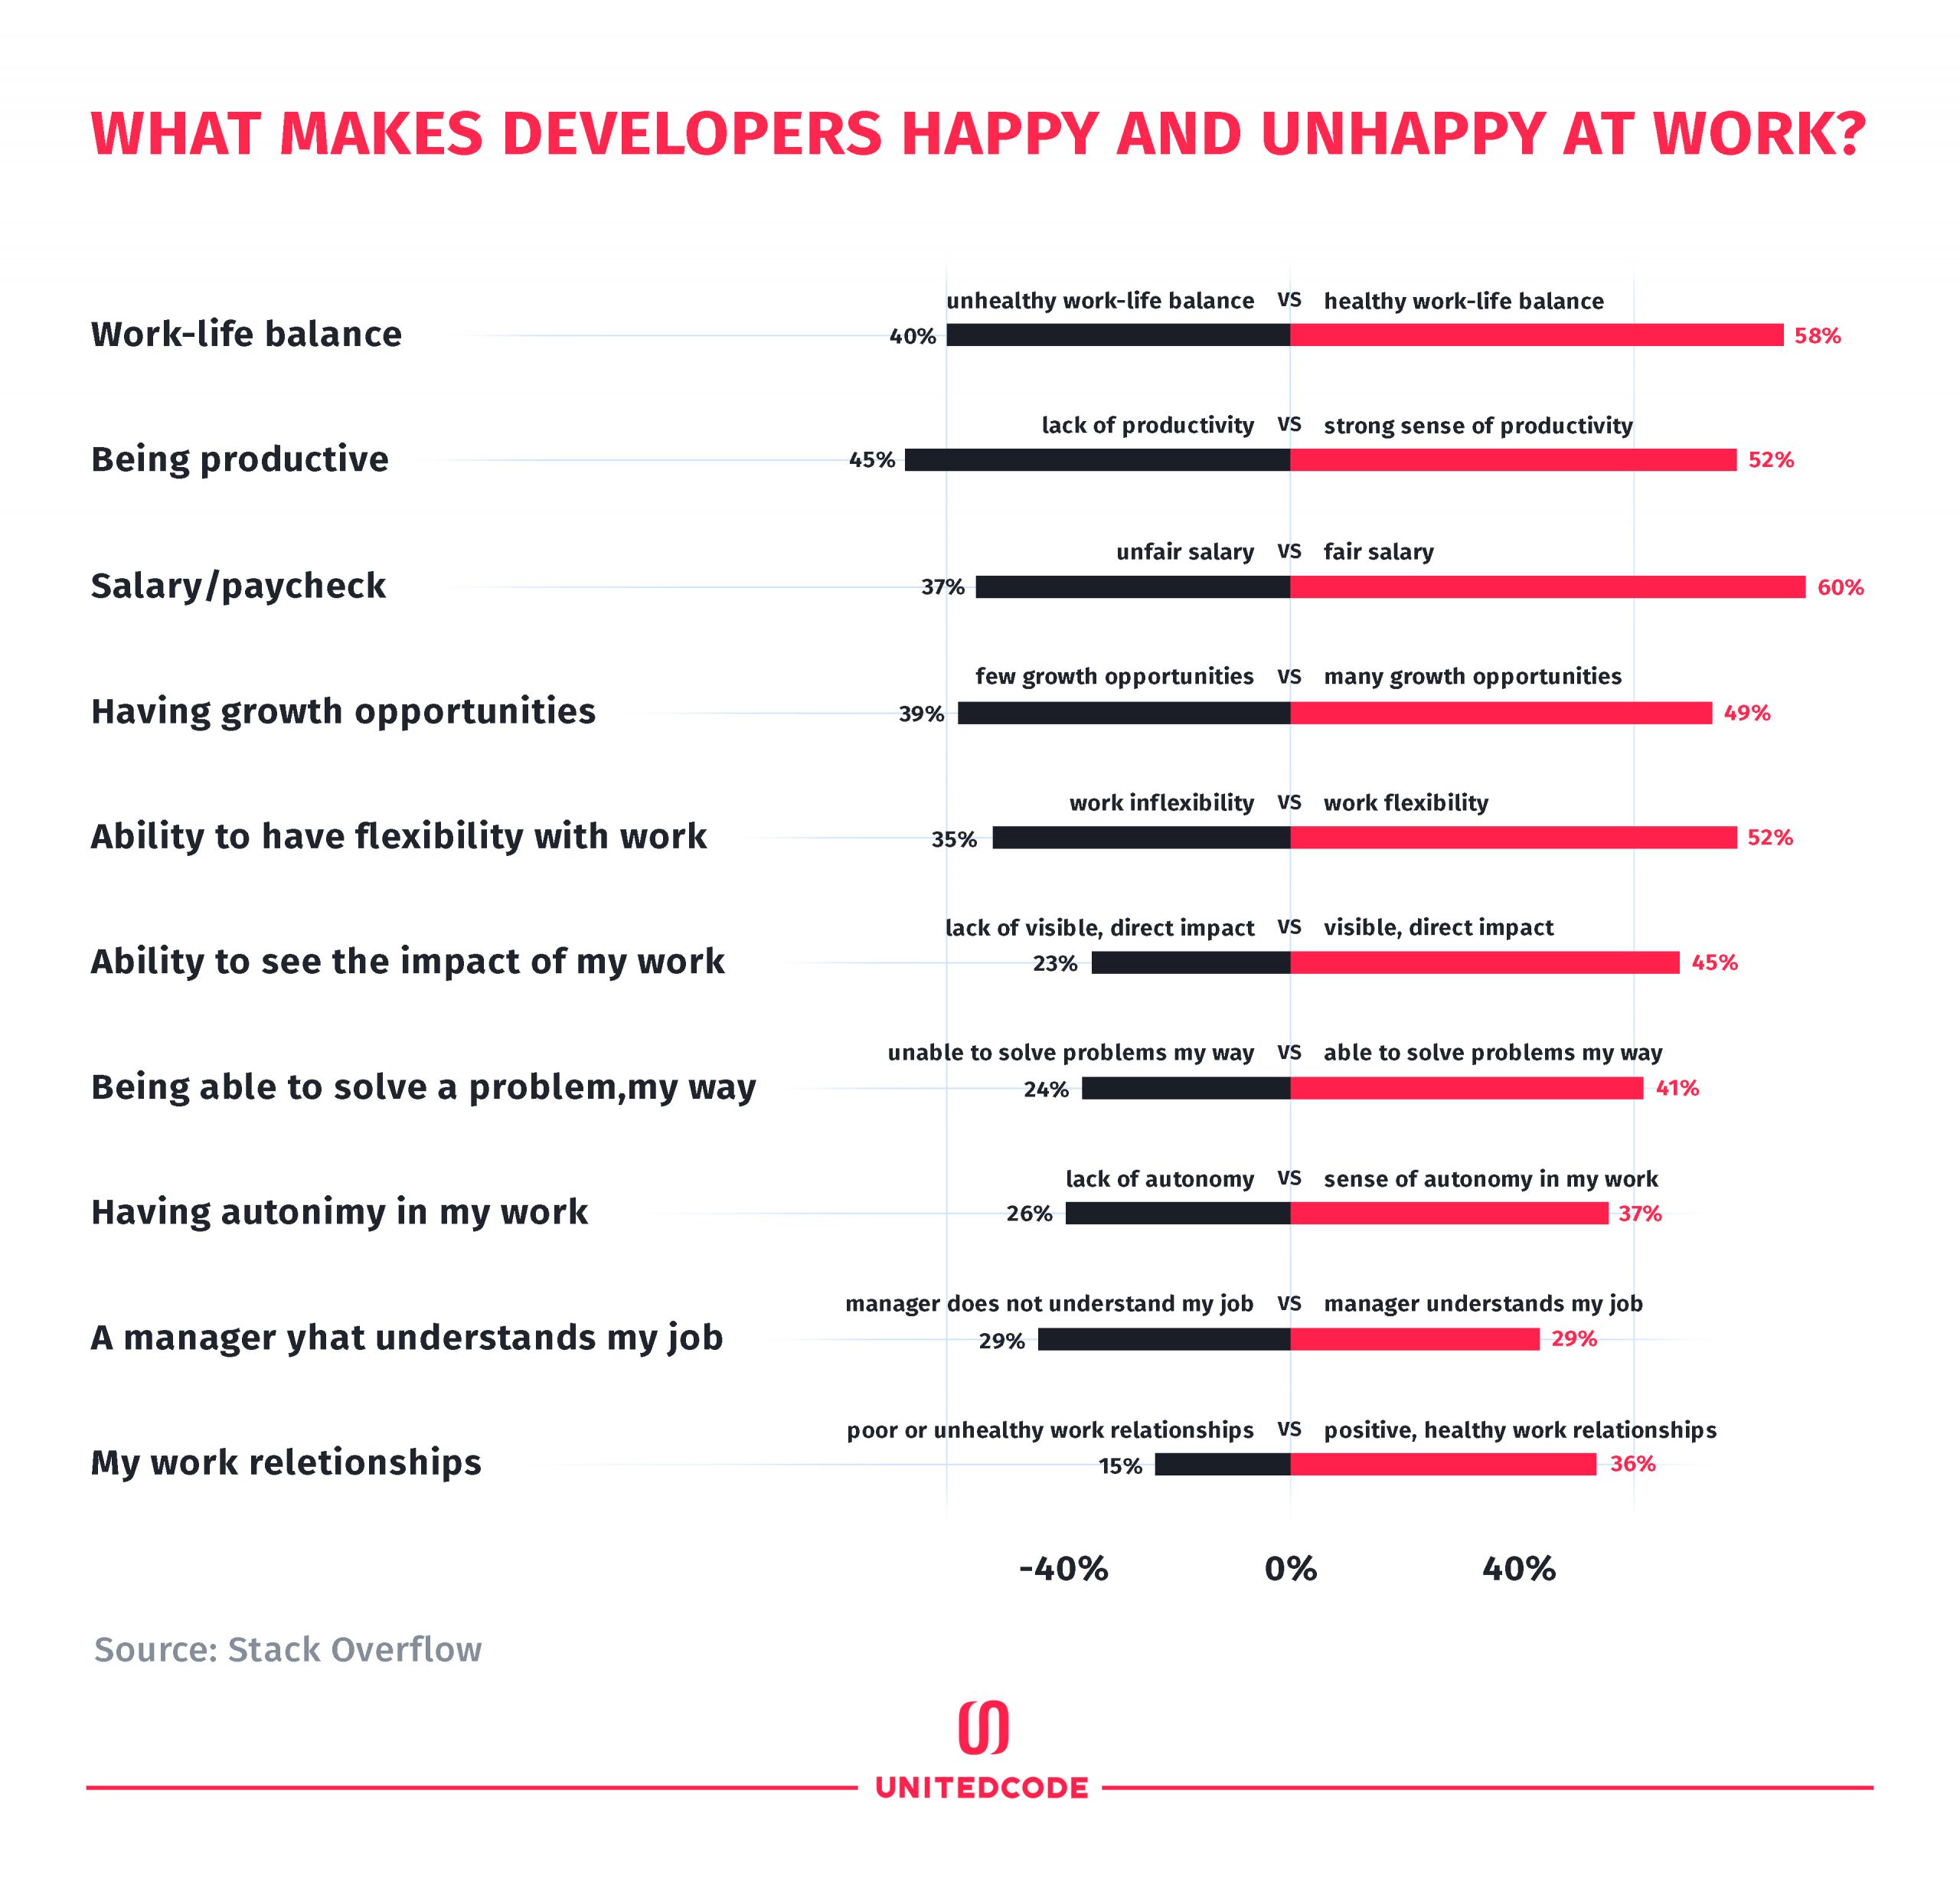 What makes developers happy at work